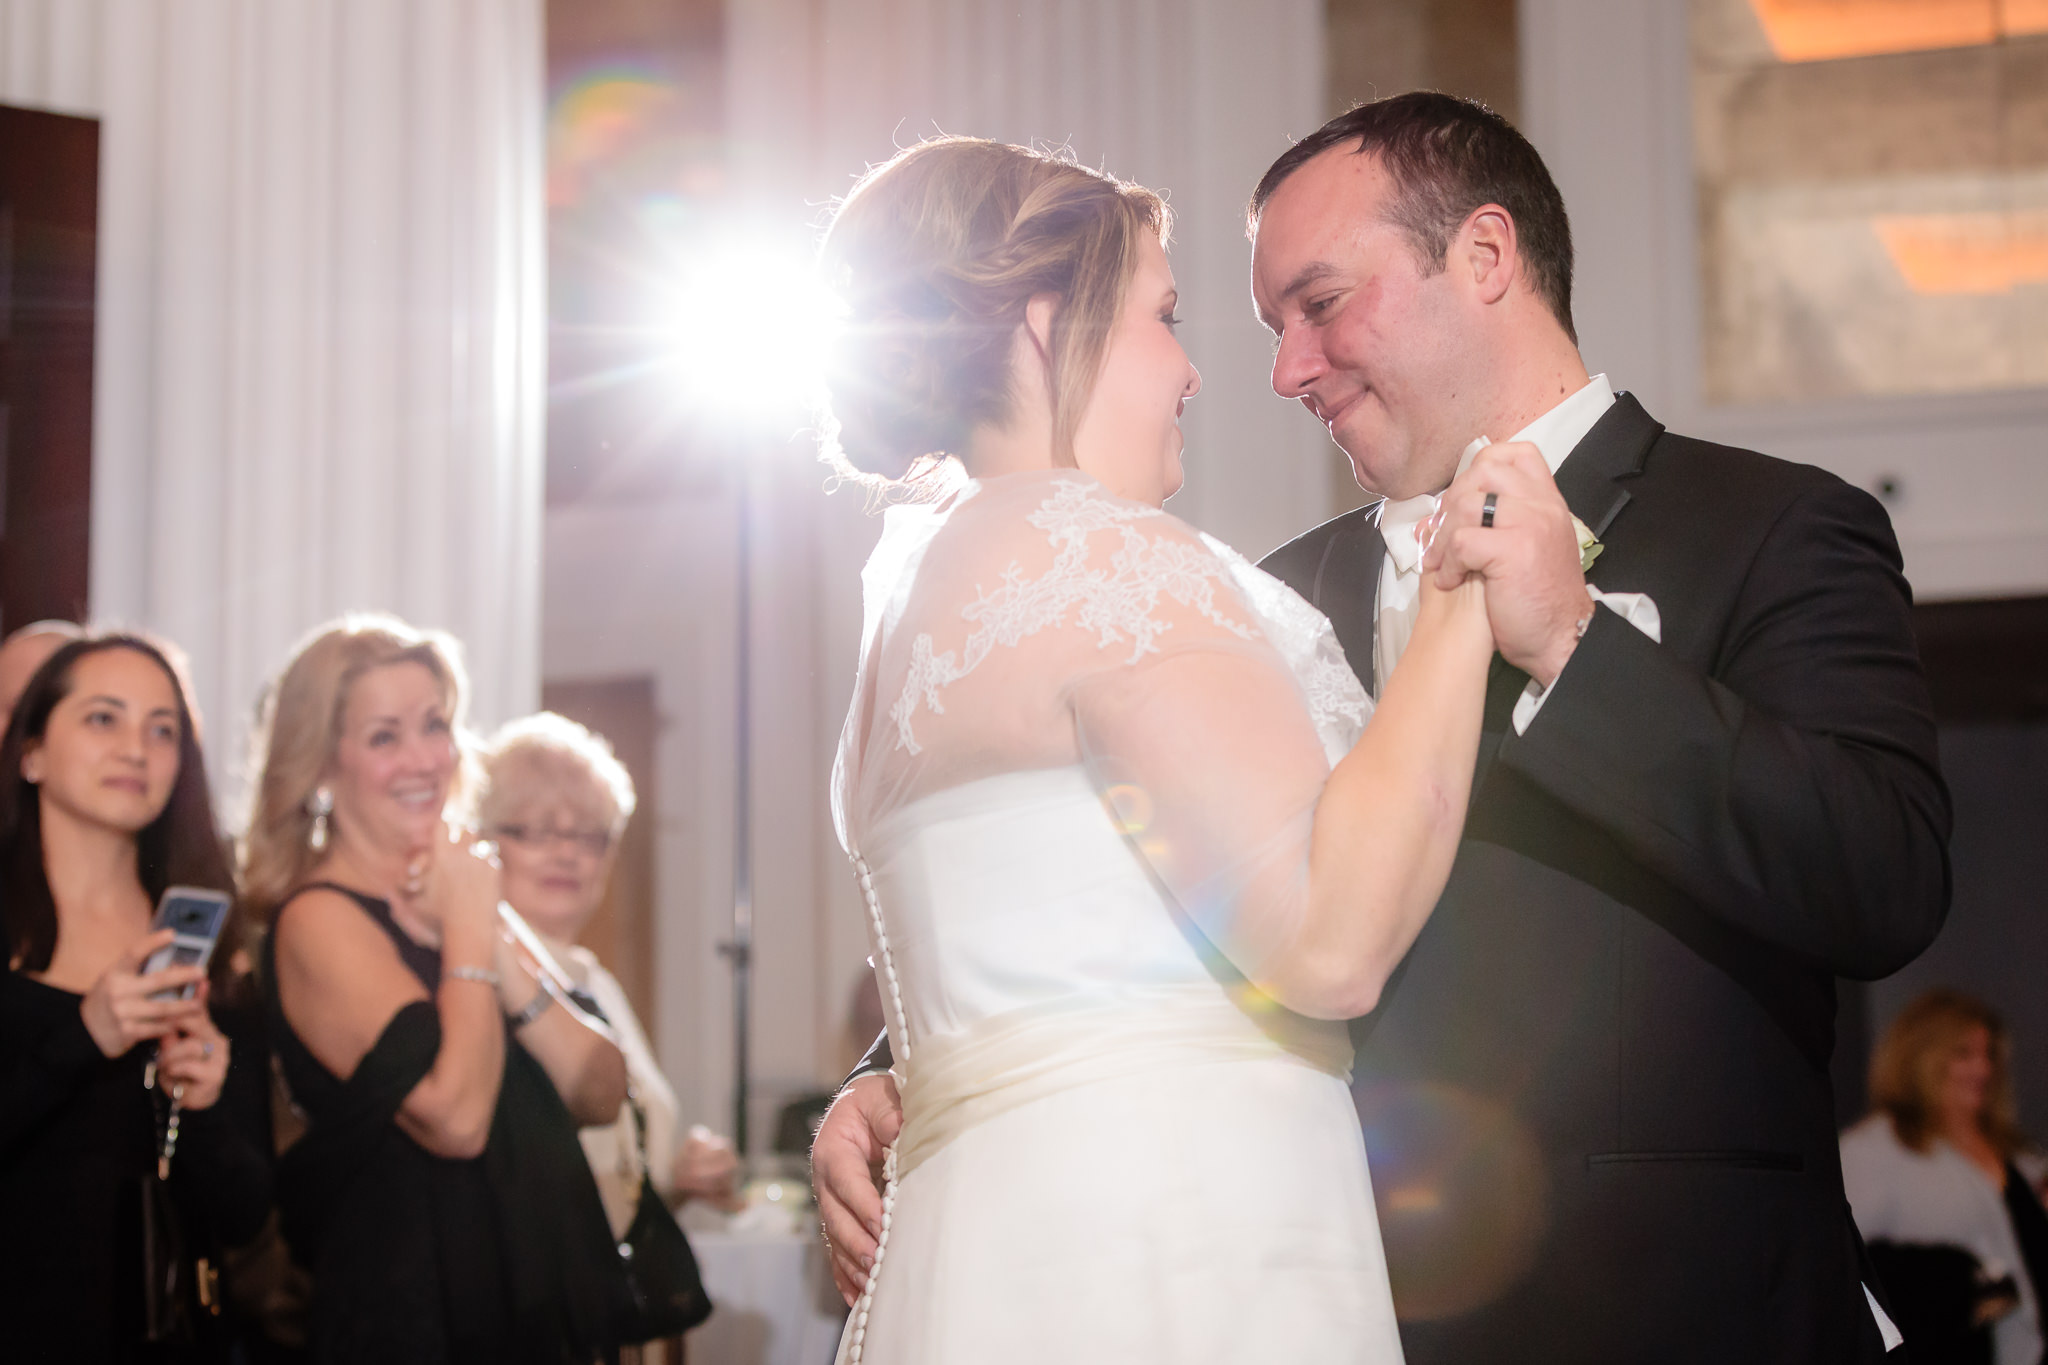 Guests smile as newlyweds share their first dance at Hotel Monaco in Pittsburgh